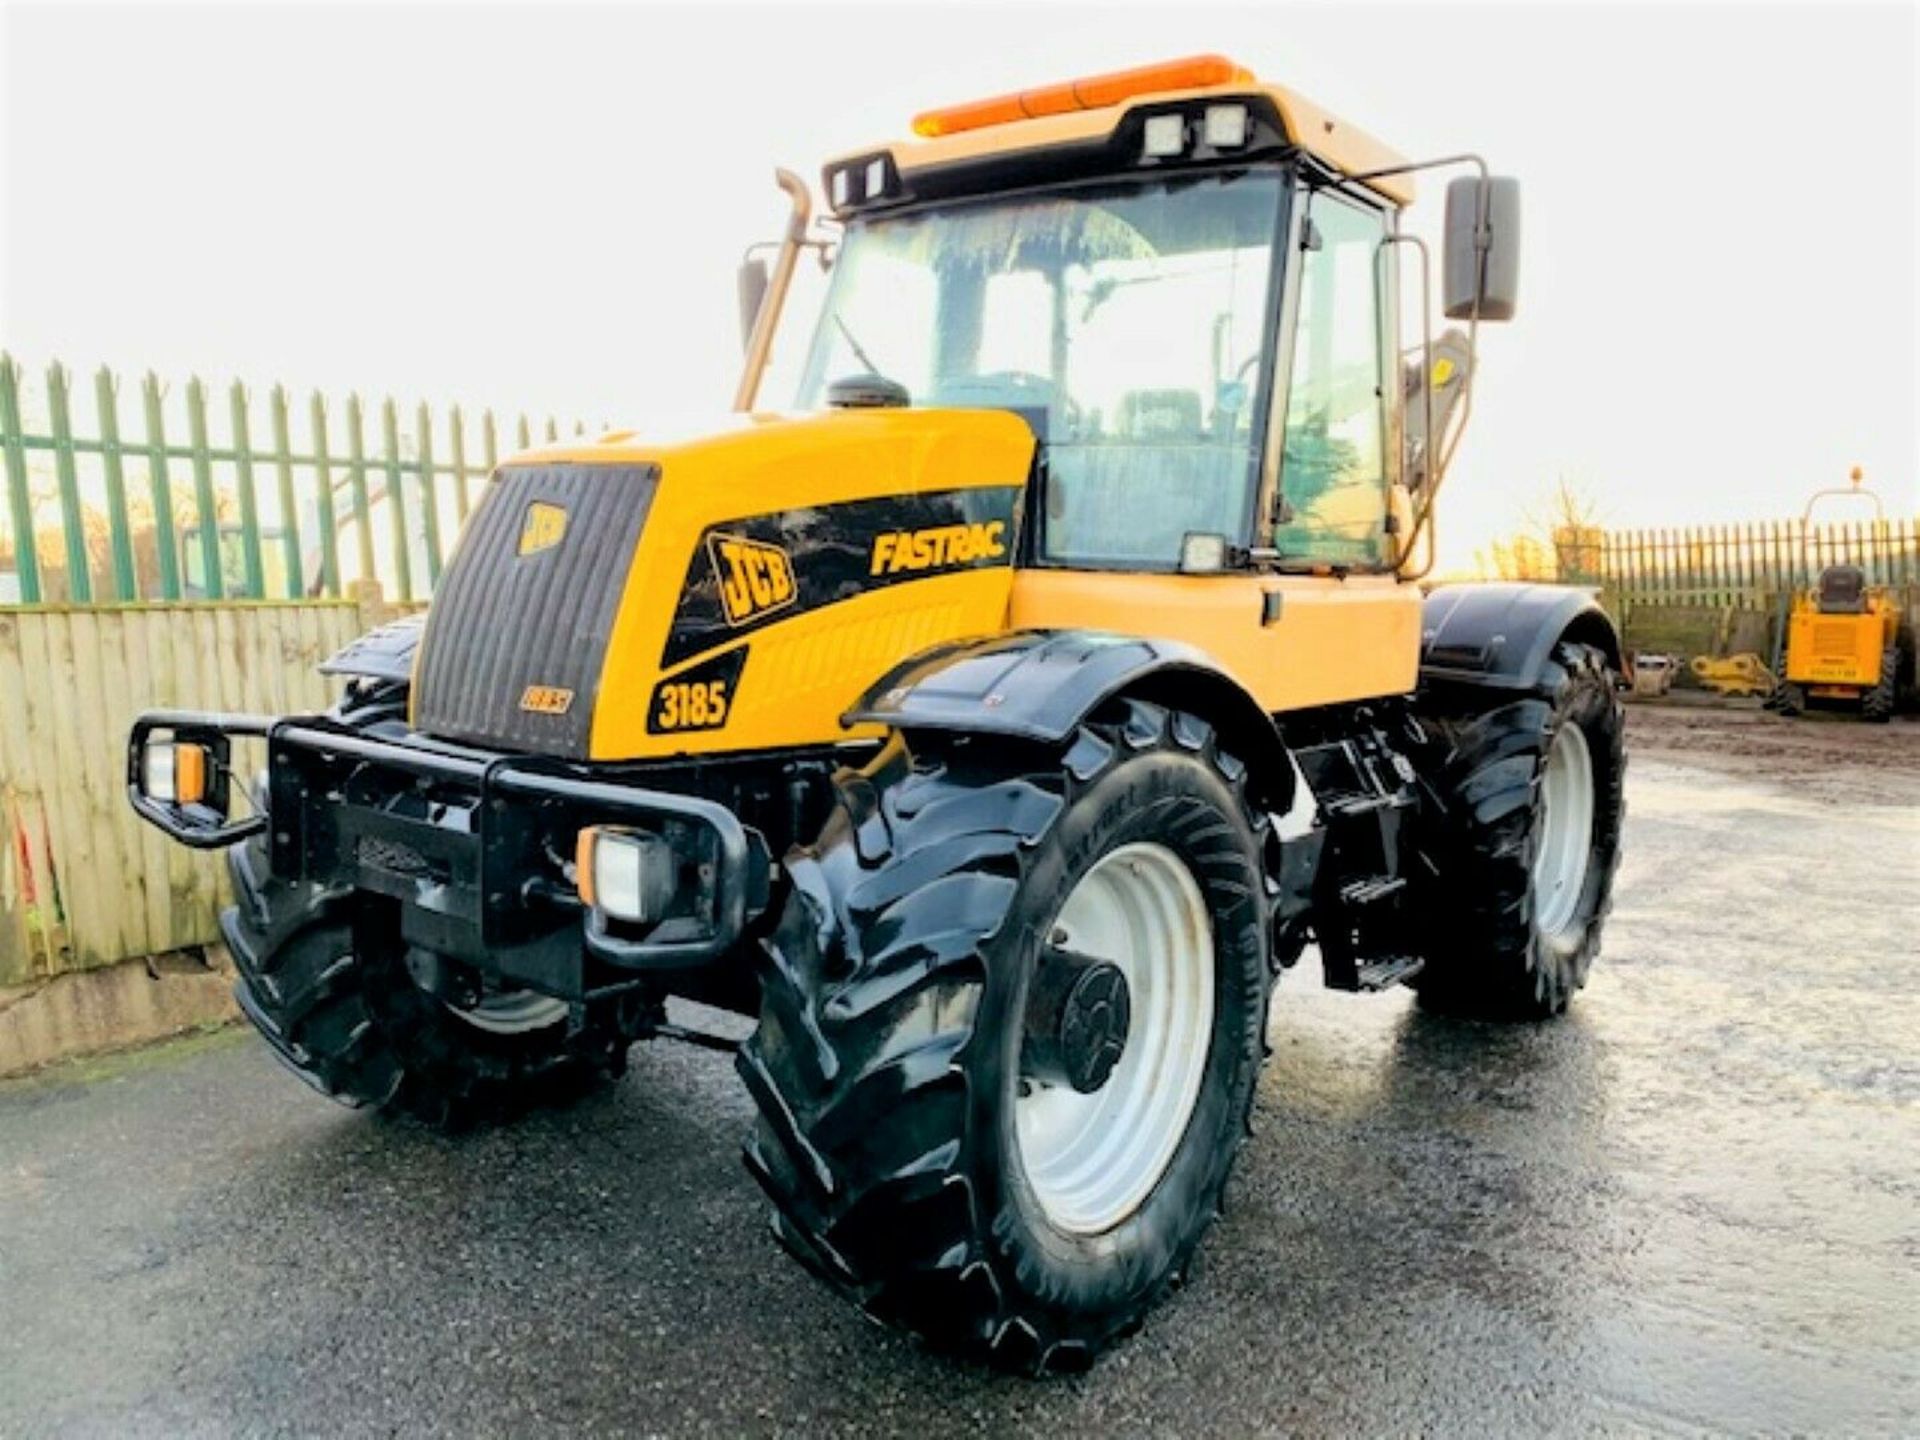 JCB Fastrac 3185 Tractor - Image 3 of 12